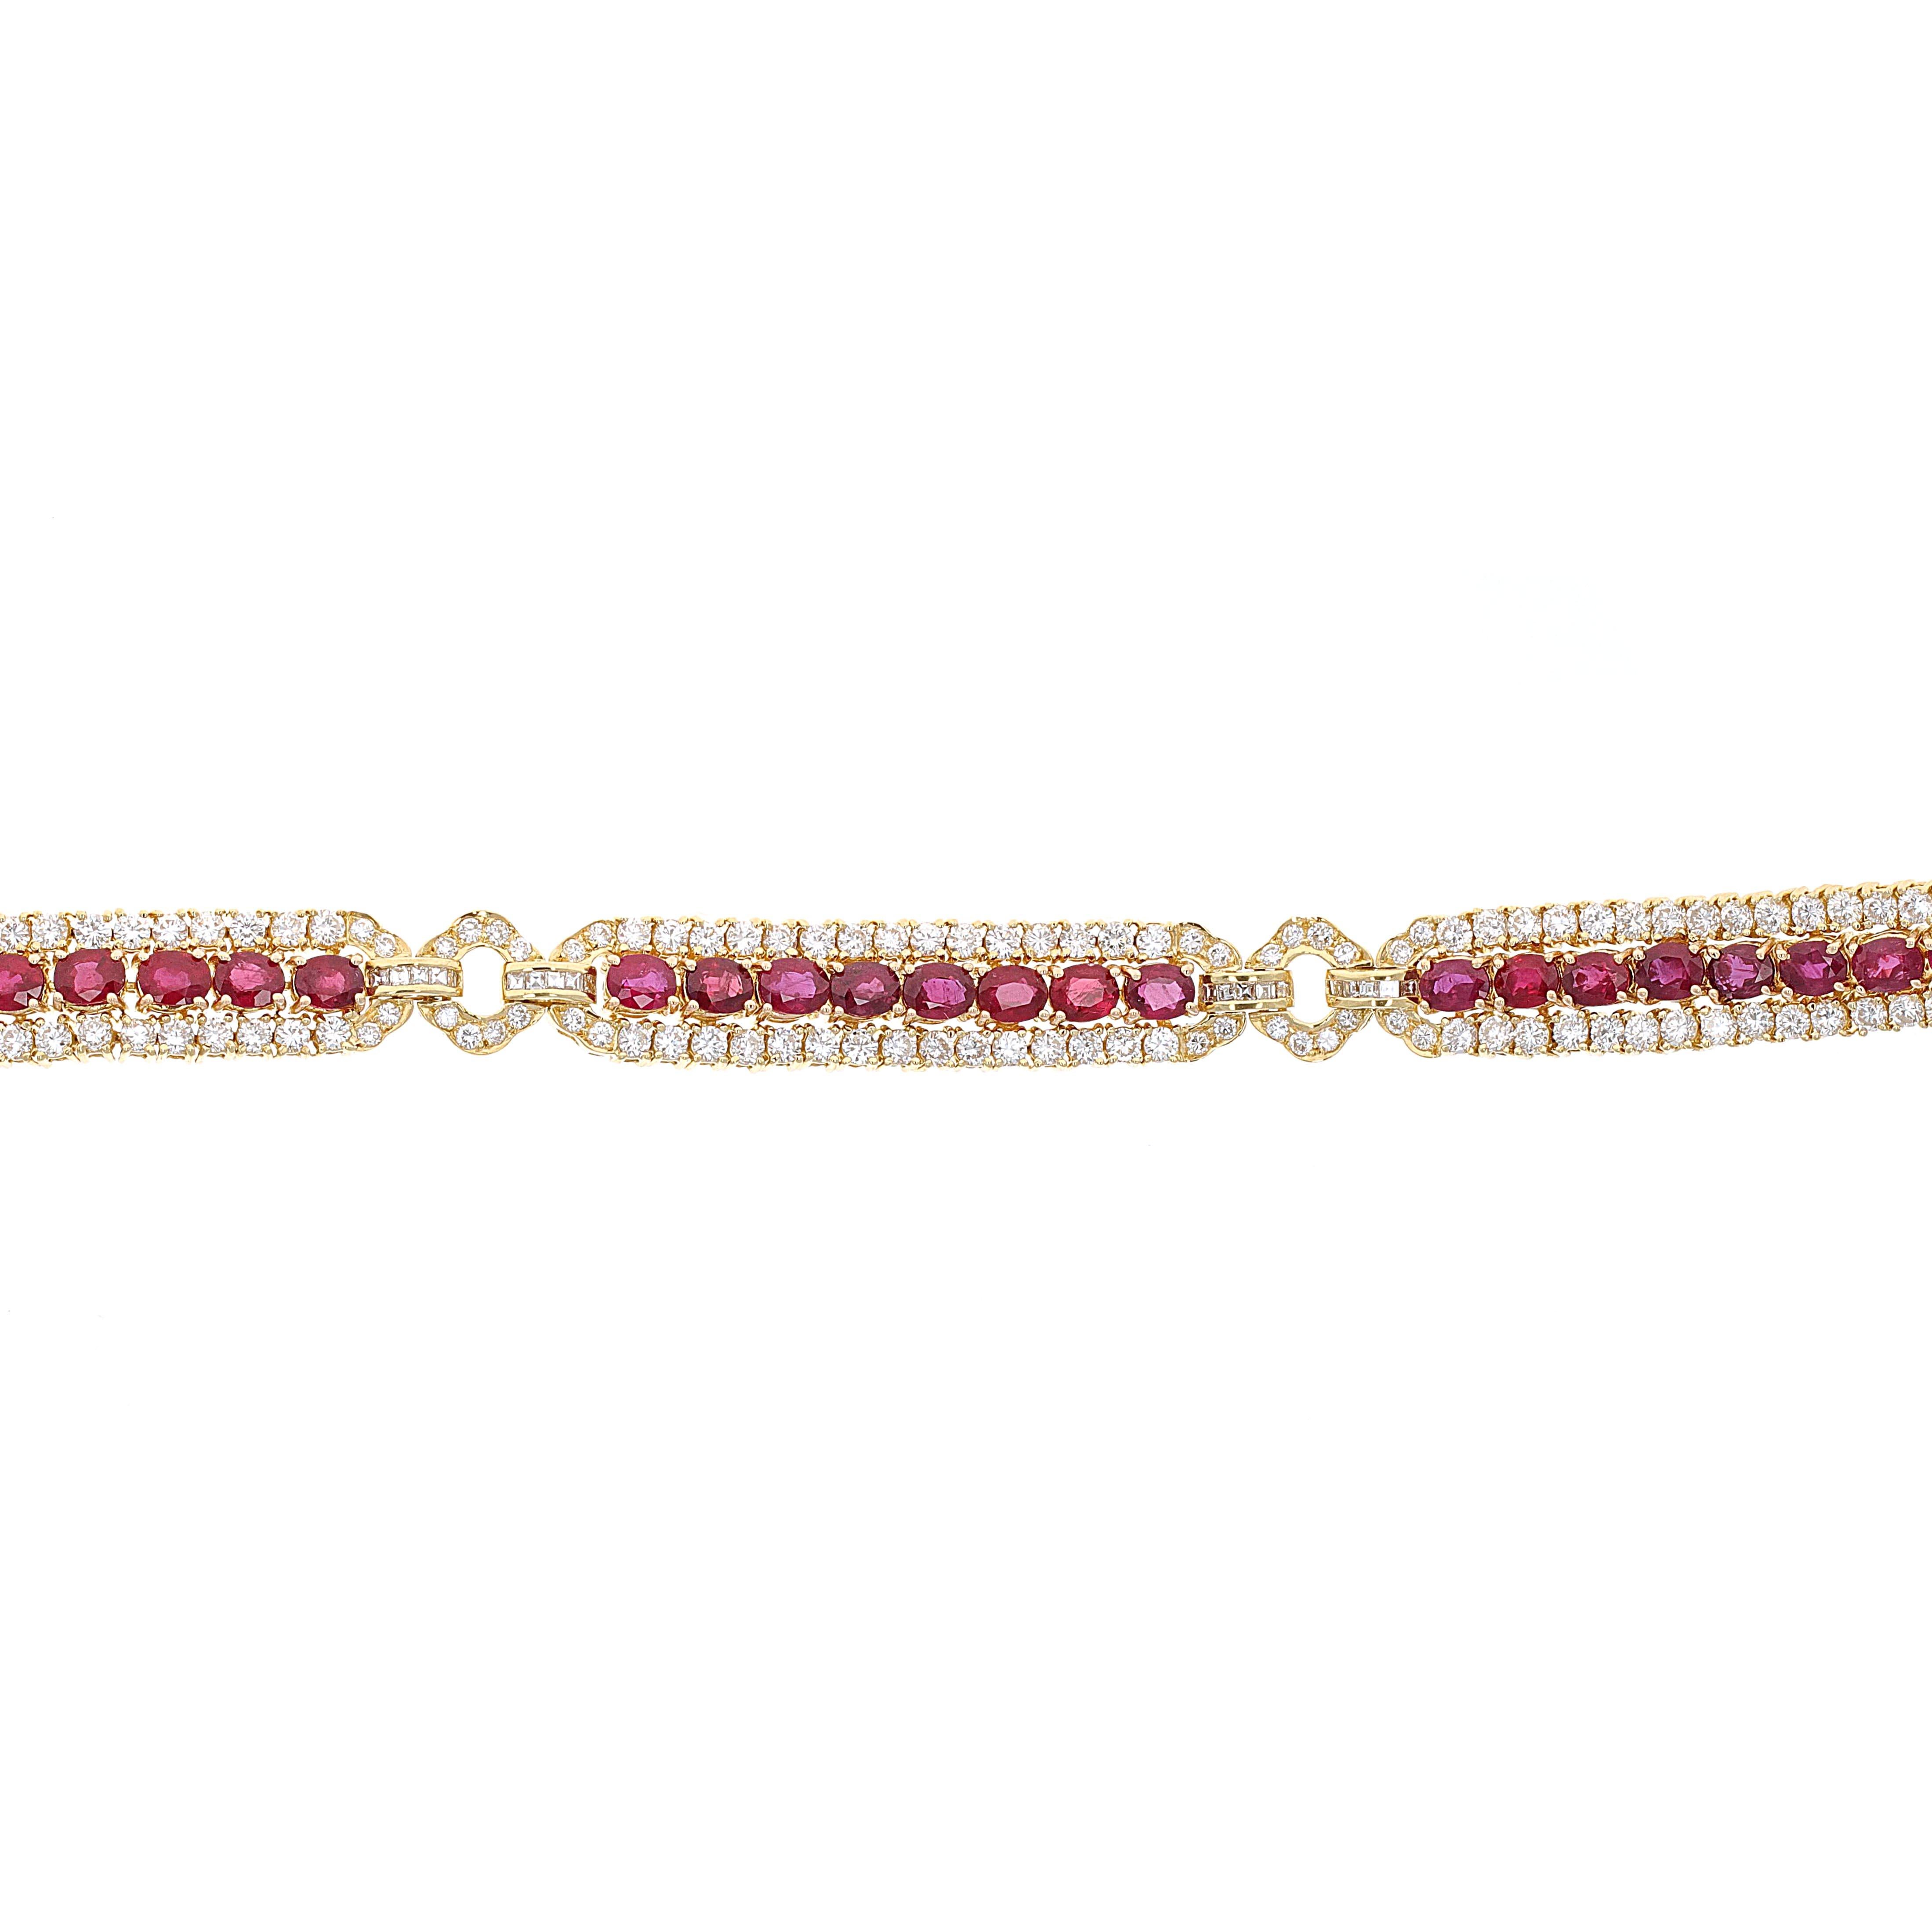 Art Deco style 18 karat yellow gold diamond and ruby tennis link bracelet. This bracelet is beautifully crafted and in excellent condition. There are 24 bright red oval shaped rubies weighing an estimated 12 carat total weight. There are 169 round